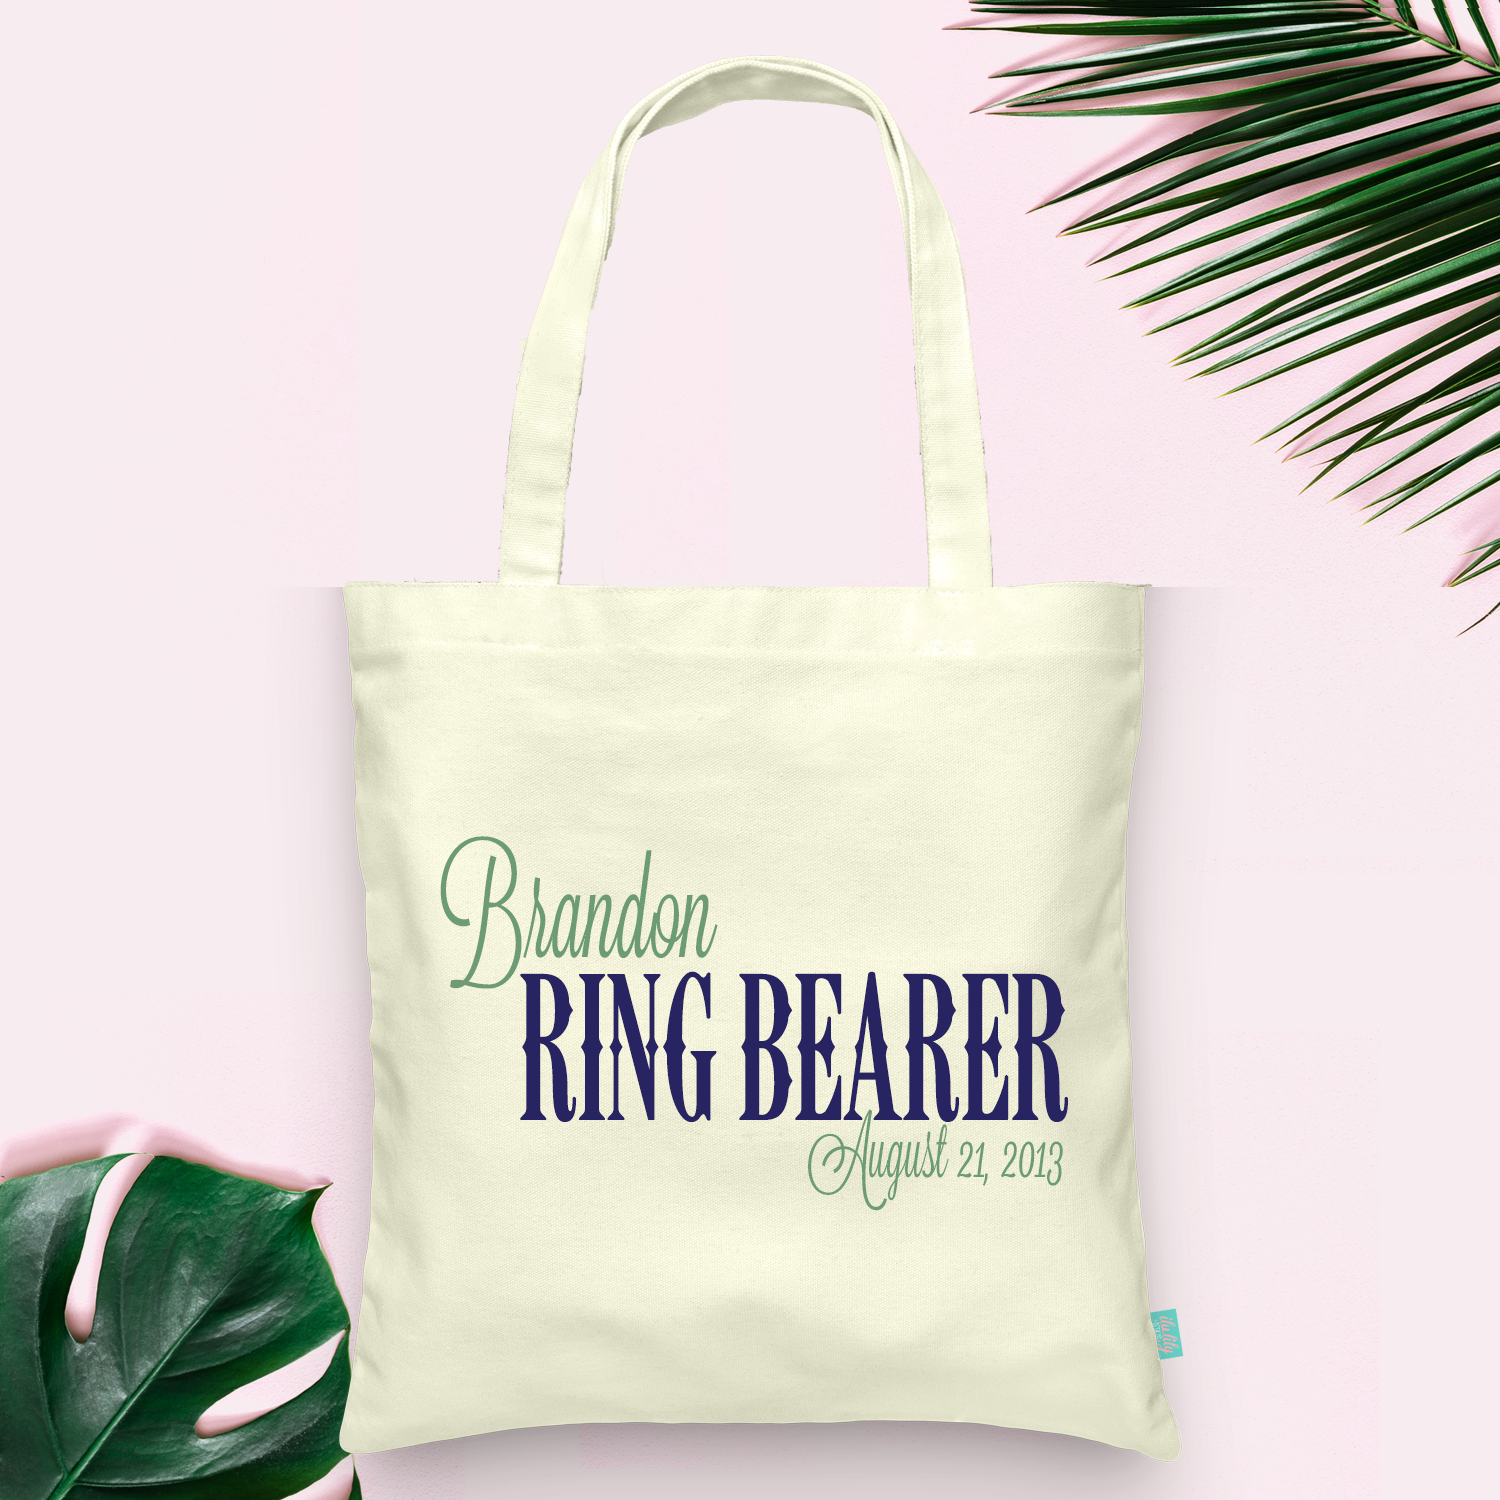 Ring Bearer Personalized Tote Bag